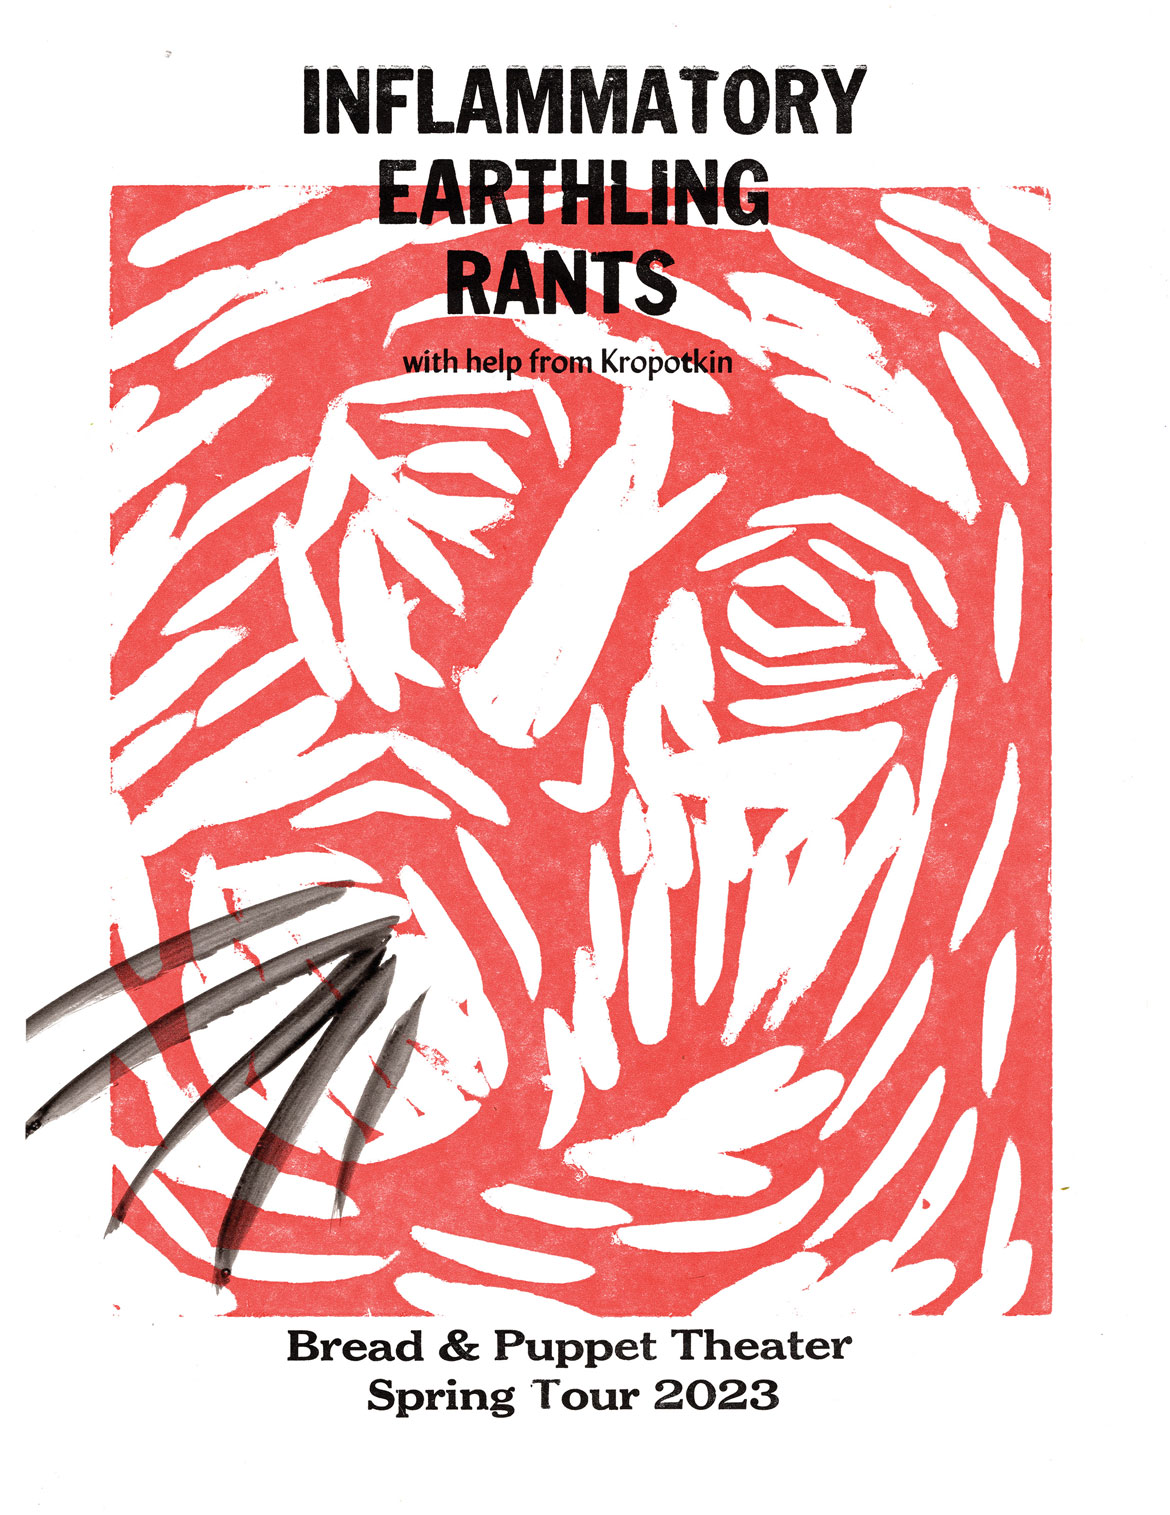 Poster for Bread and Puppet Theater's " Inflammatory Earthling Rants (with help from Kropotkin)."